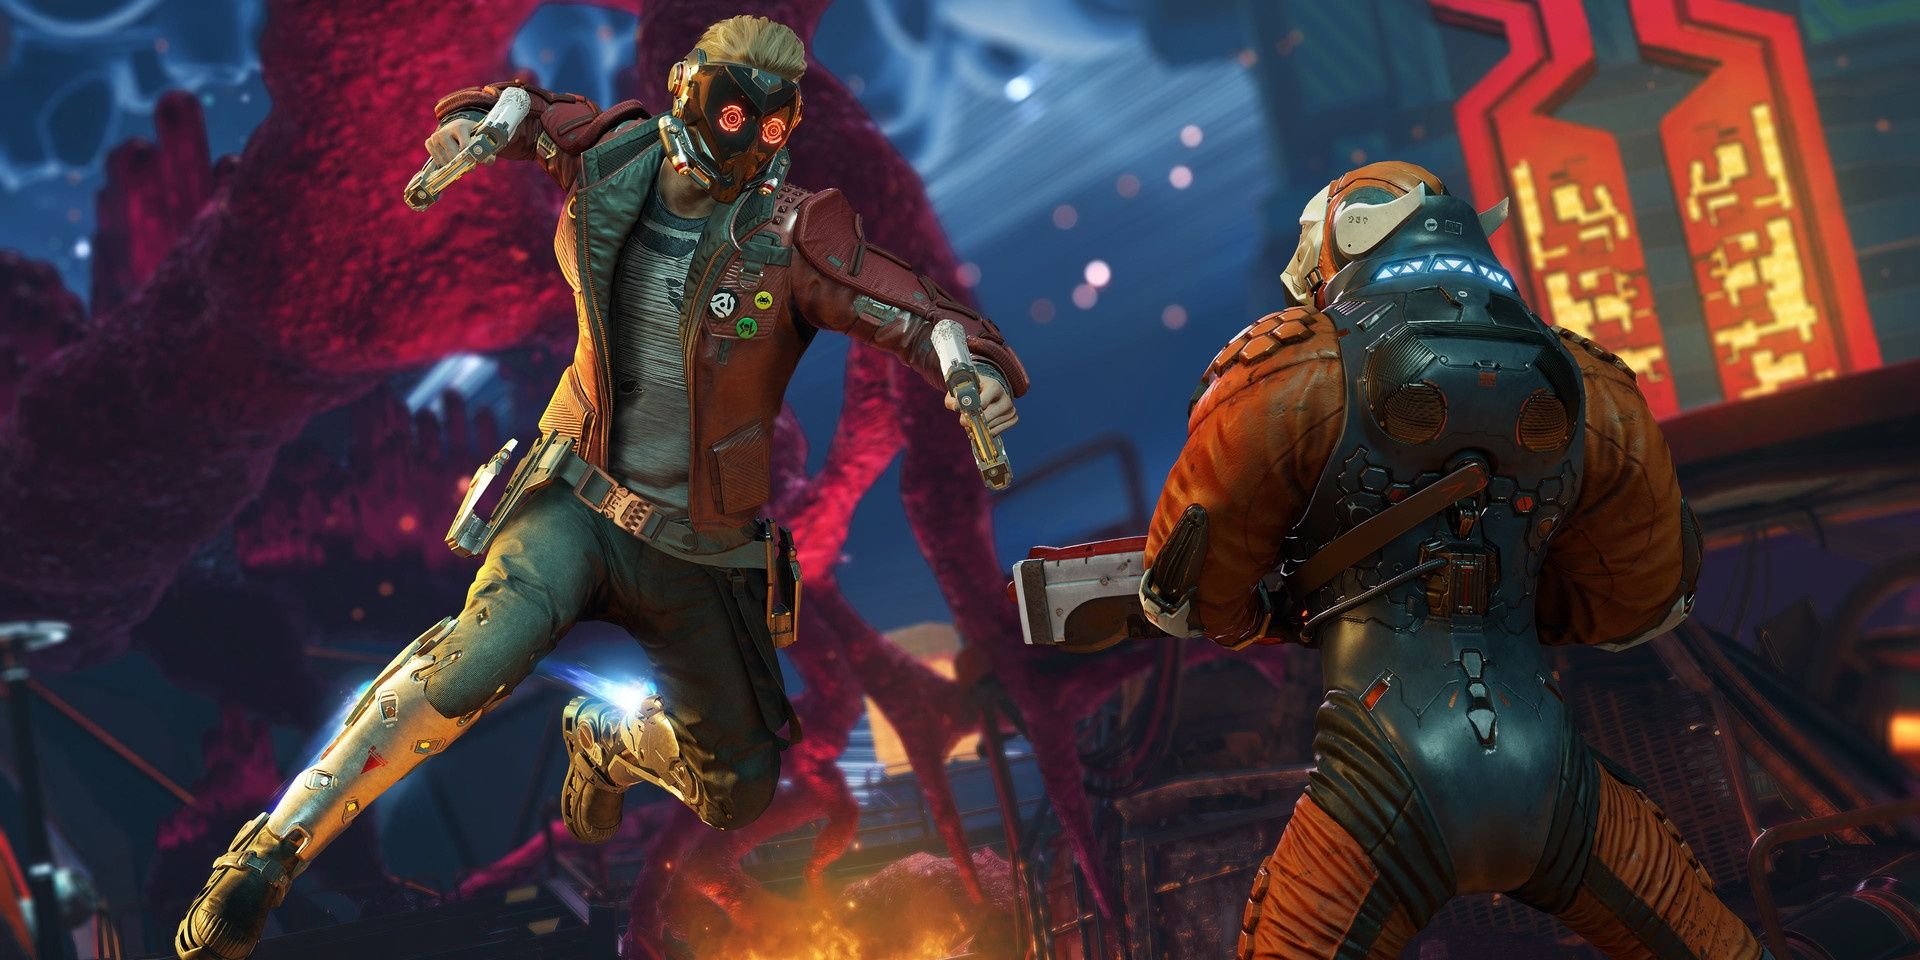 A screenshot showing Star-Lord in the Square Enix version of Guardians of the Galaxy